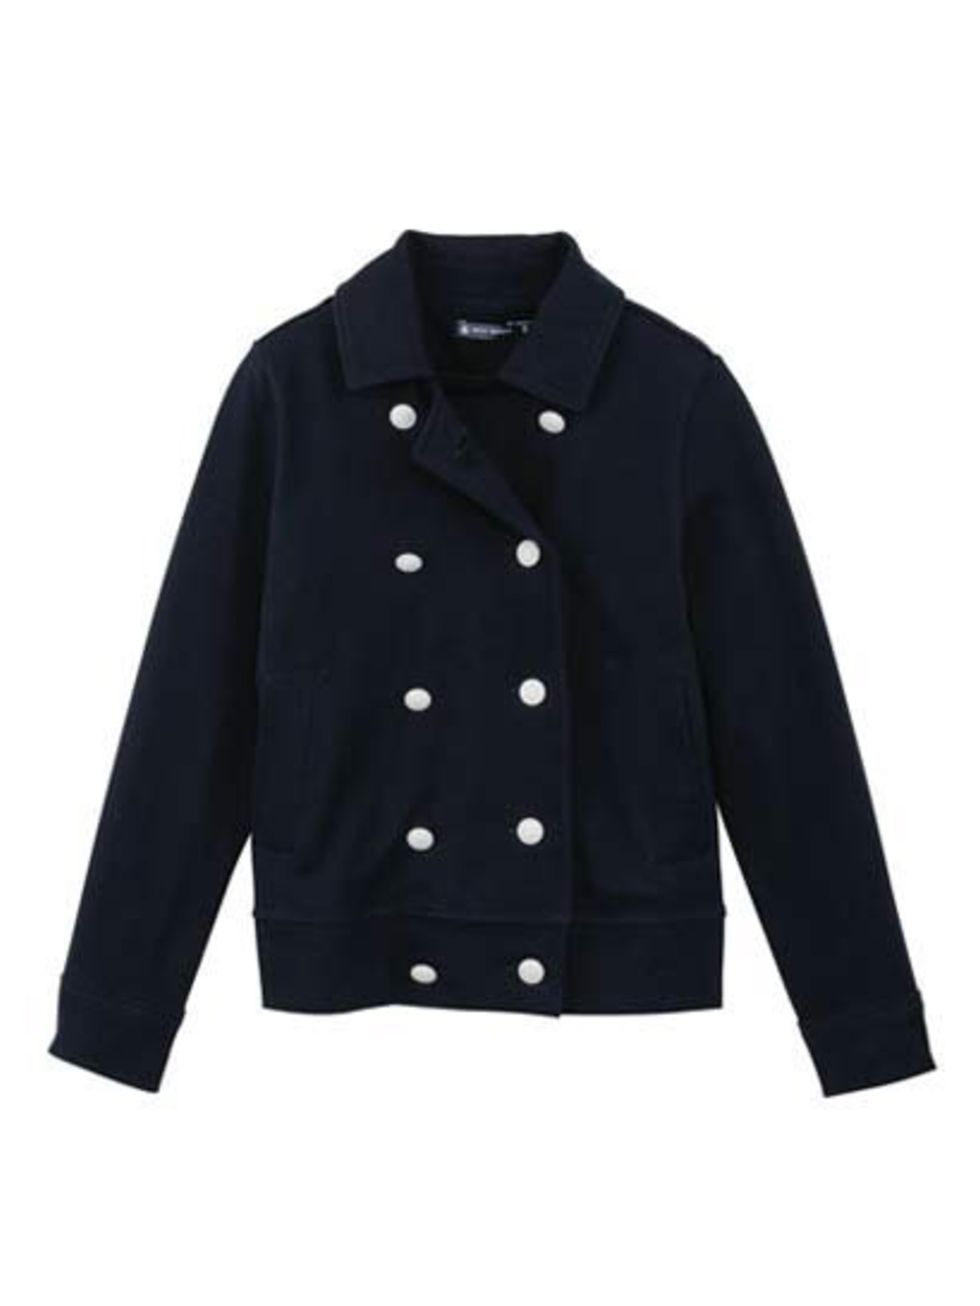 <p>With the weather on the turn, it won't be long before you can swap your heavy winter coat for a mid-weight number, like this simple pea coat.</p><p><a href="http://www.petit-bateau.co.uk/e-shop/product/35607/3P4/women-s-pea-coat-in-heavy-jersey.html">P